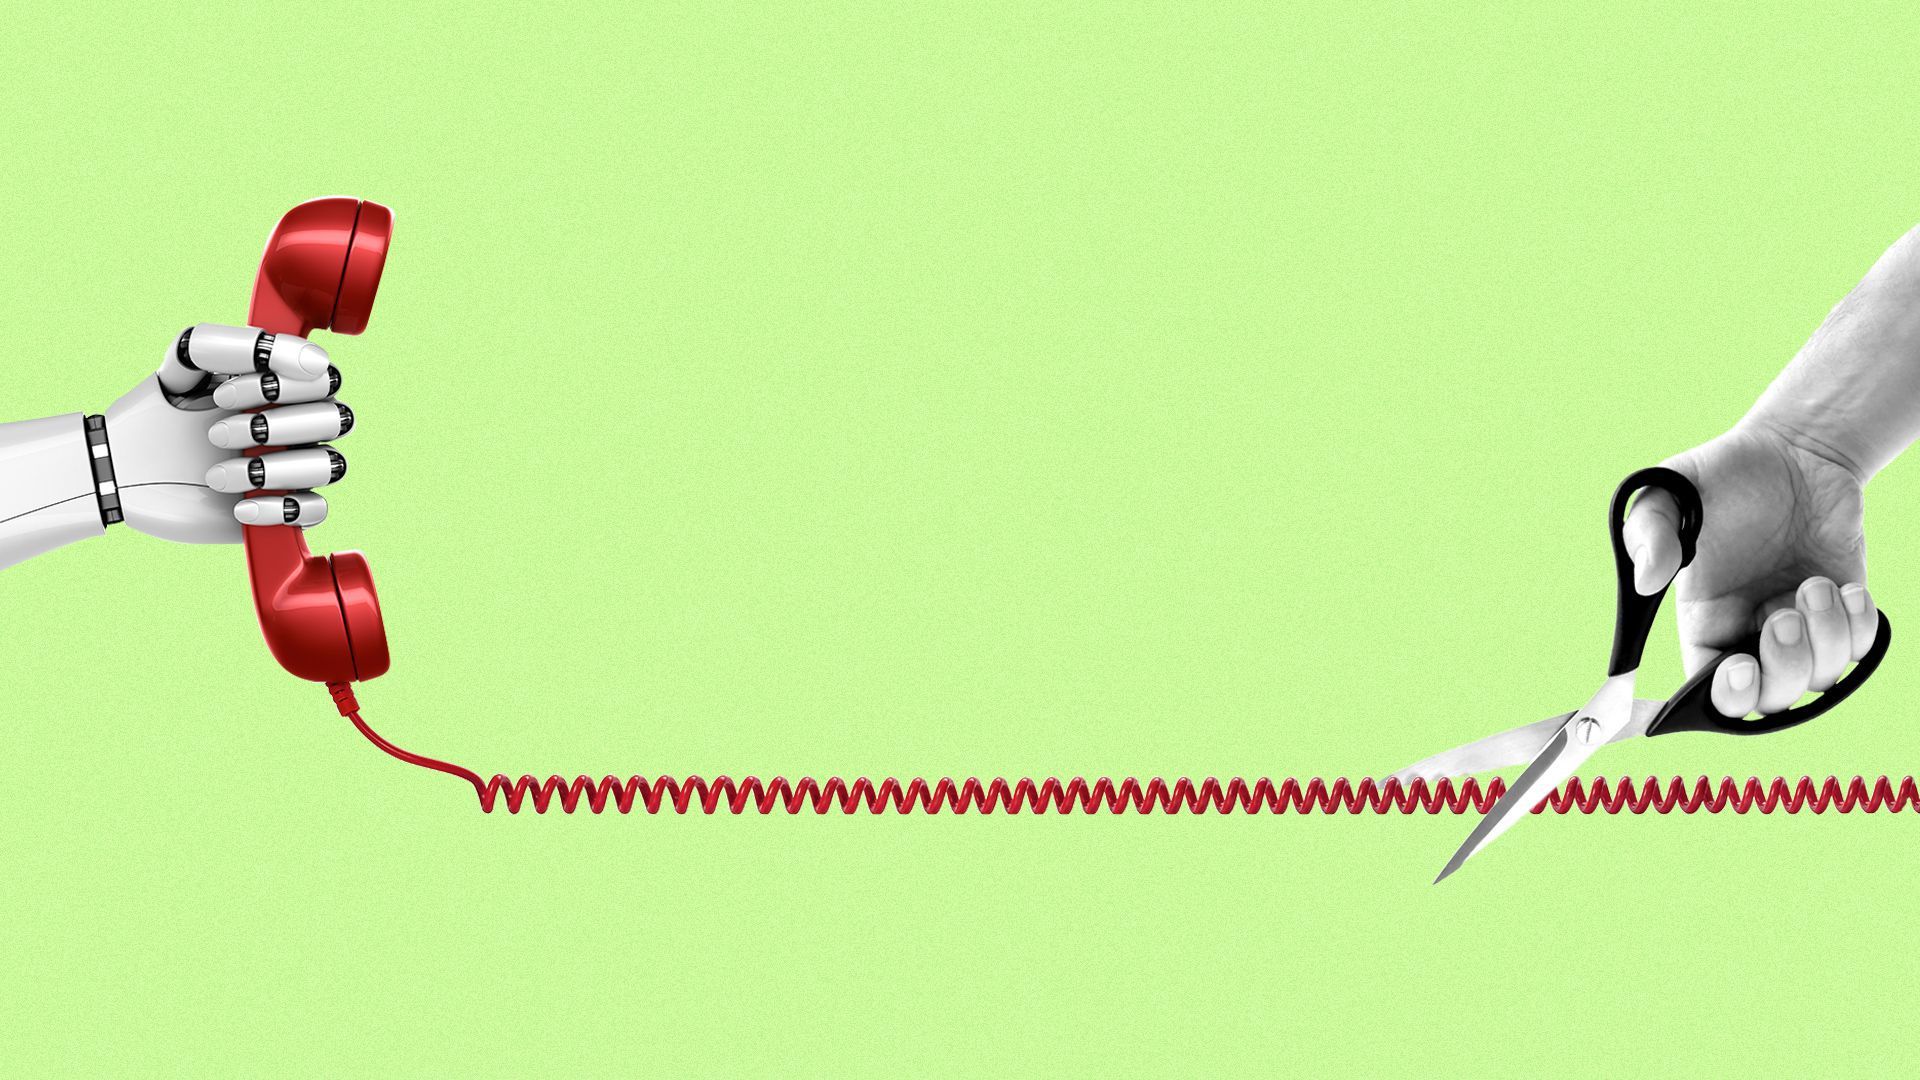 An illustration of scissors cutting a phone cord